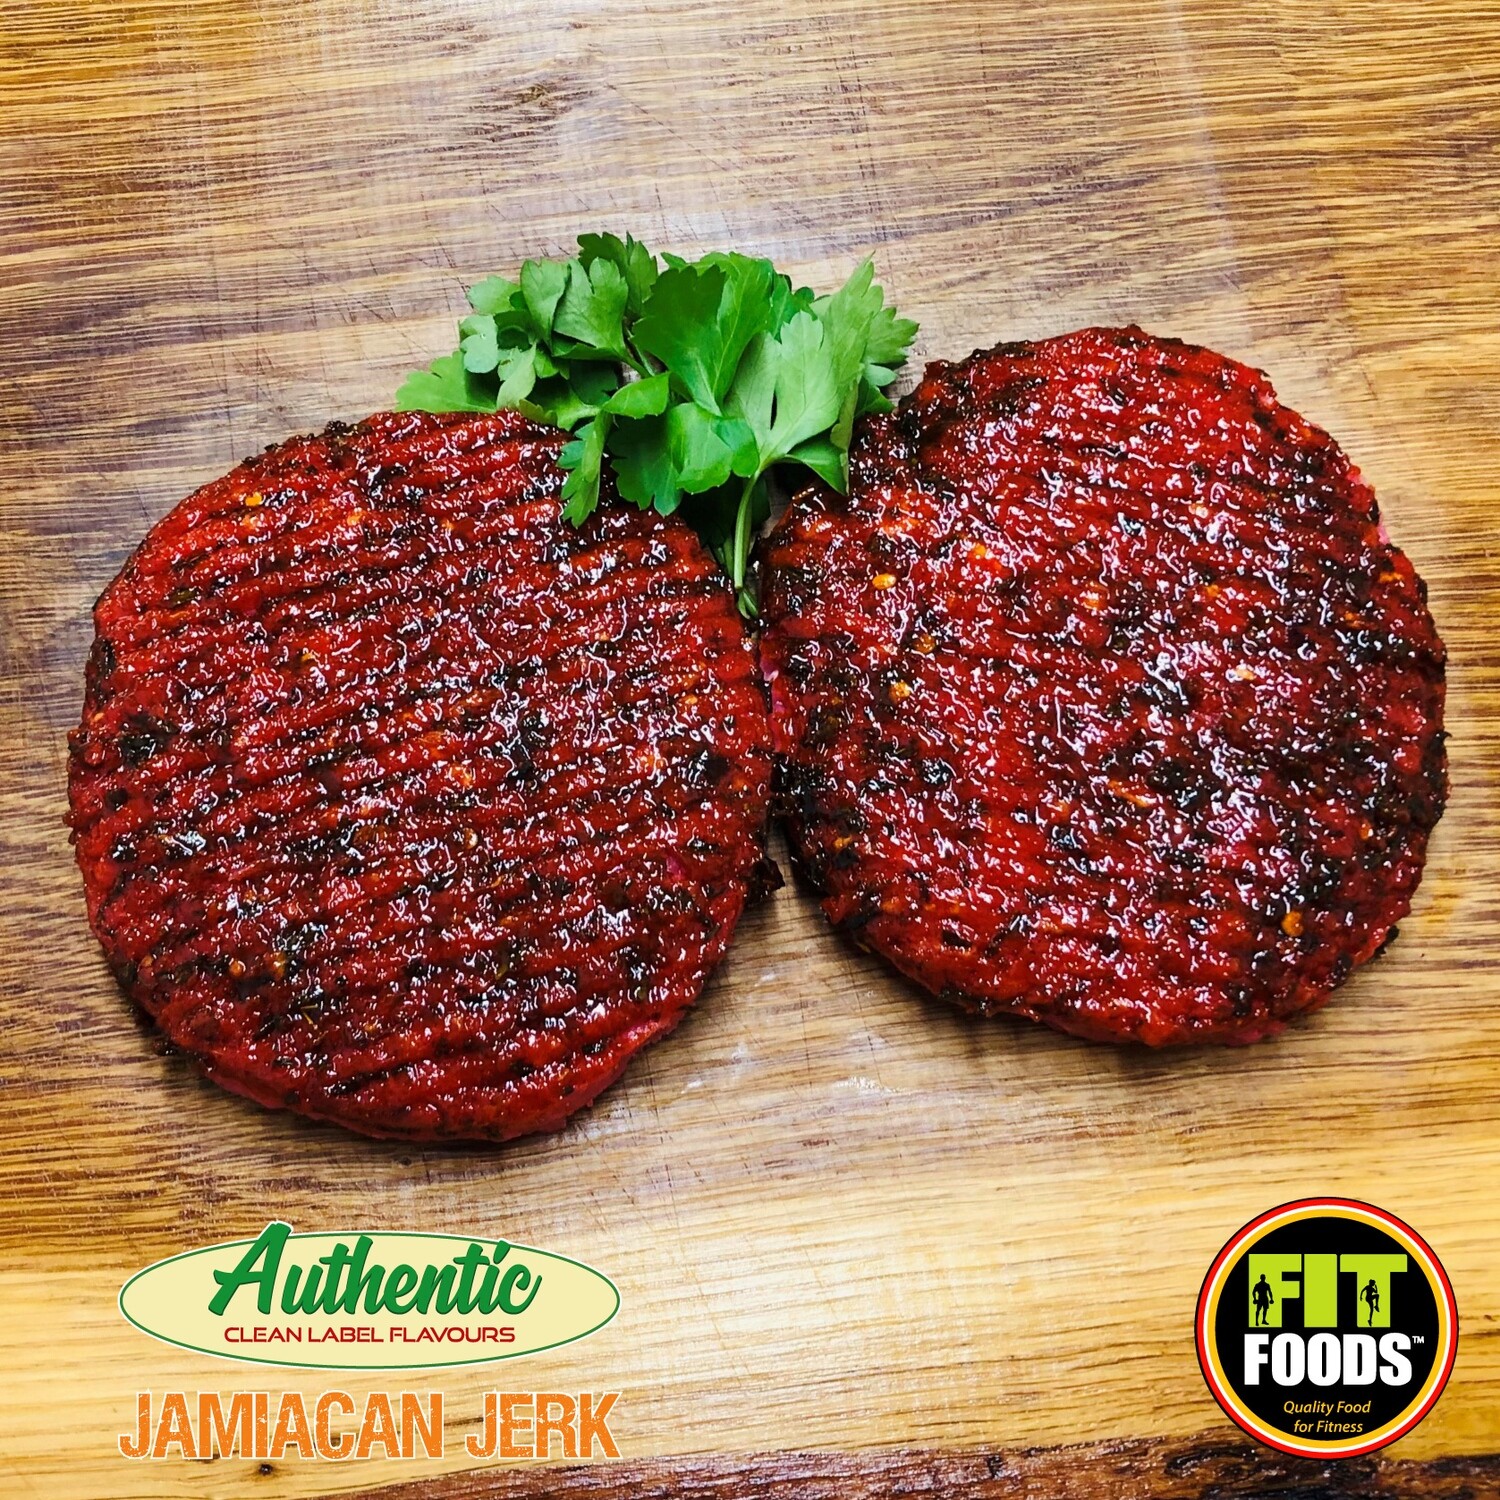 FIT FOODS 'AUTHENTIC' TURKEY BURGERS - ANY 3 PACKS FOR £9.99